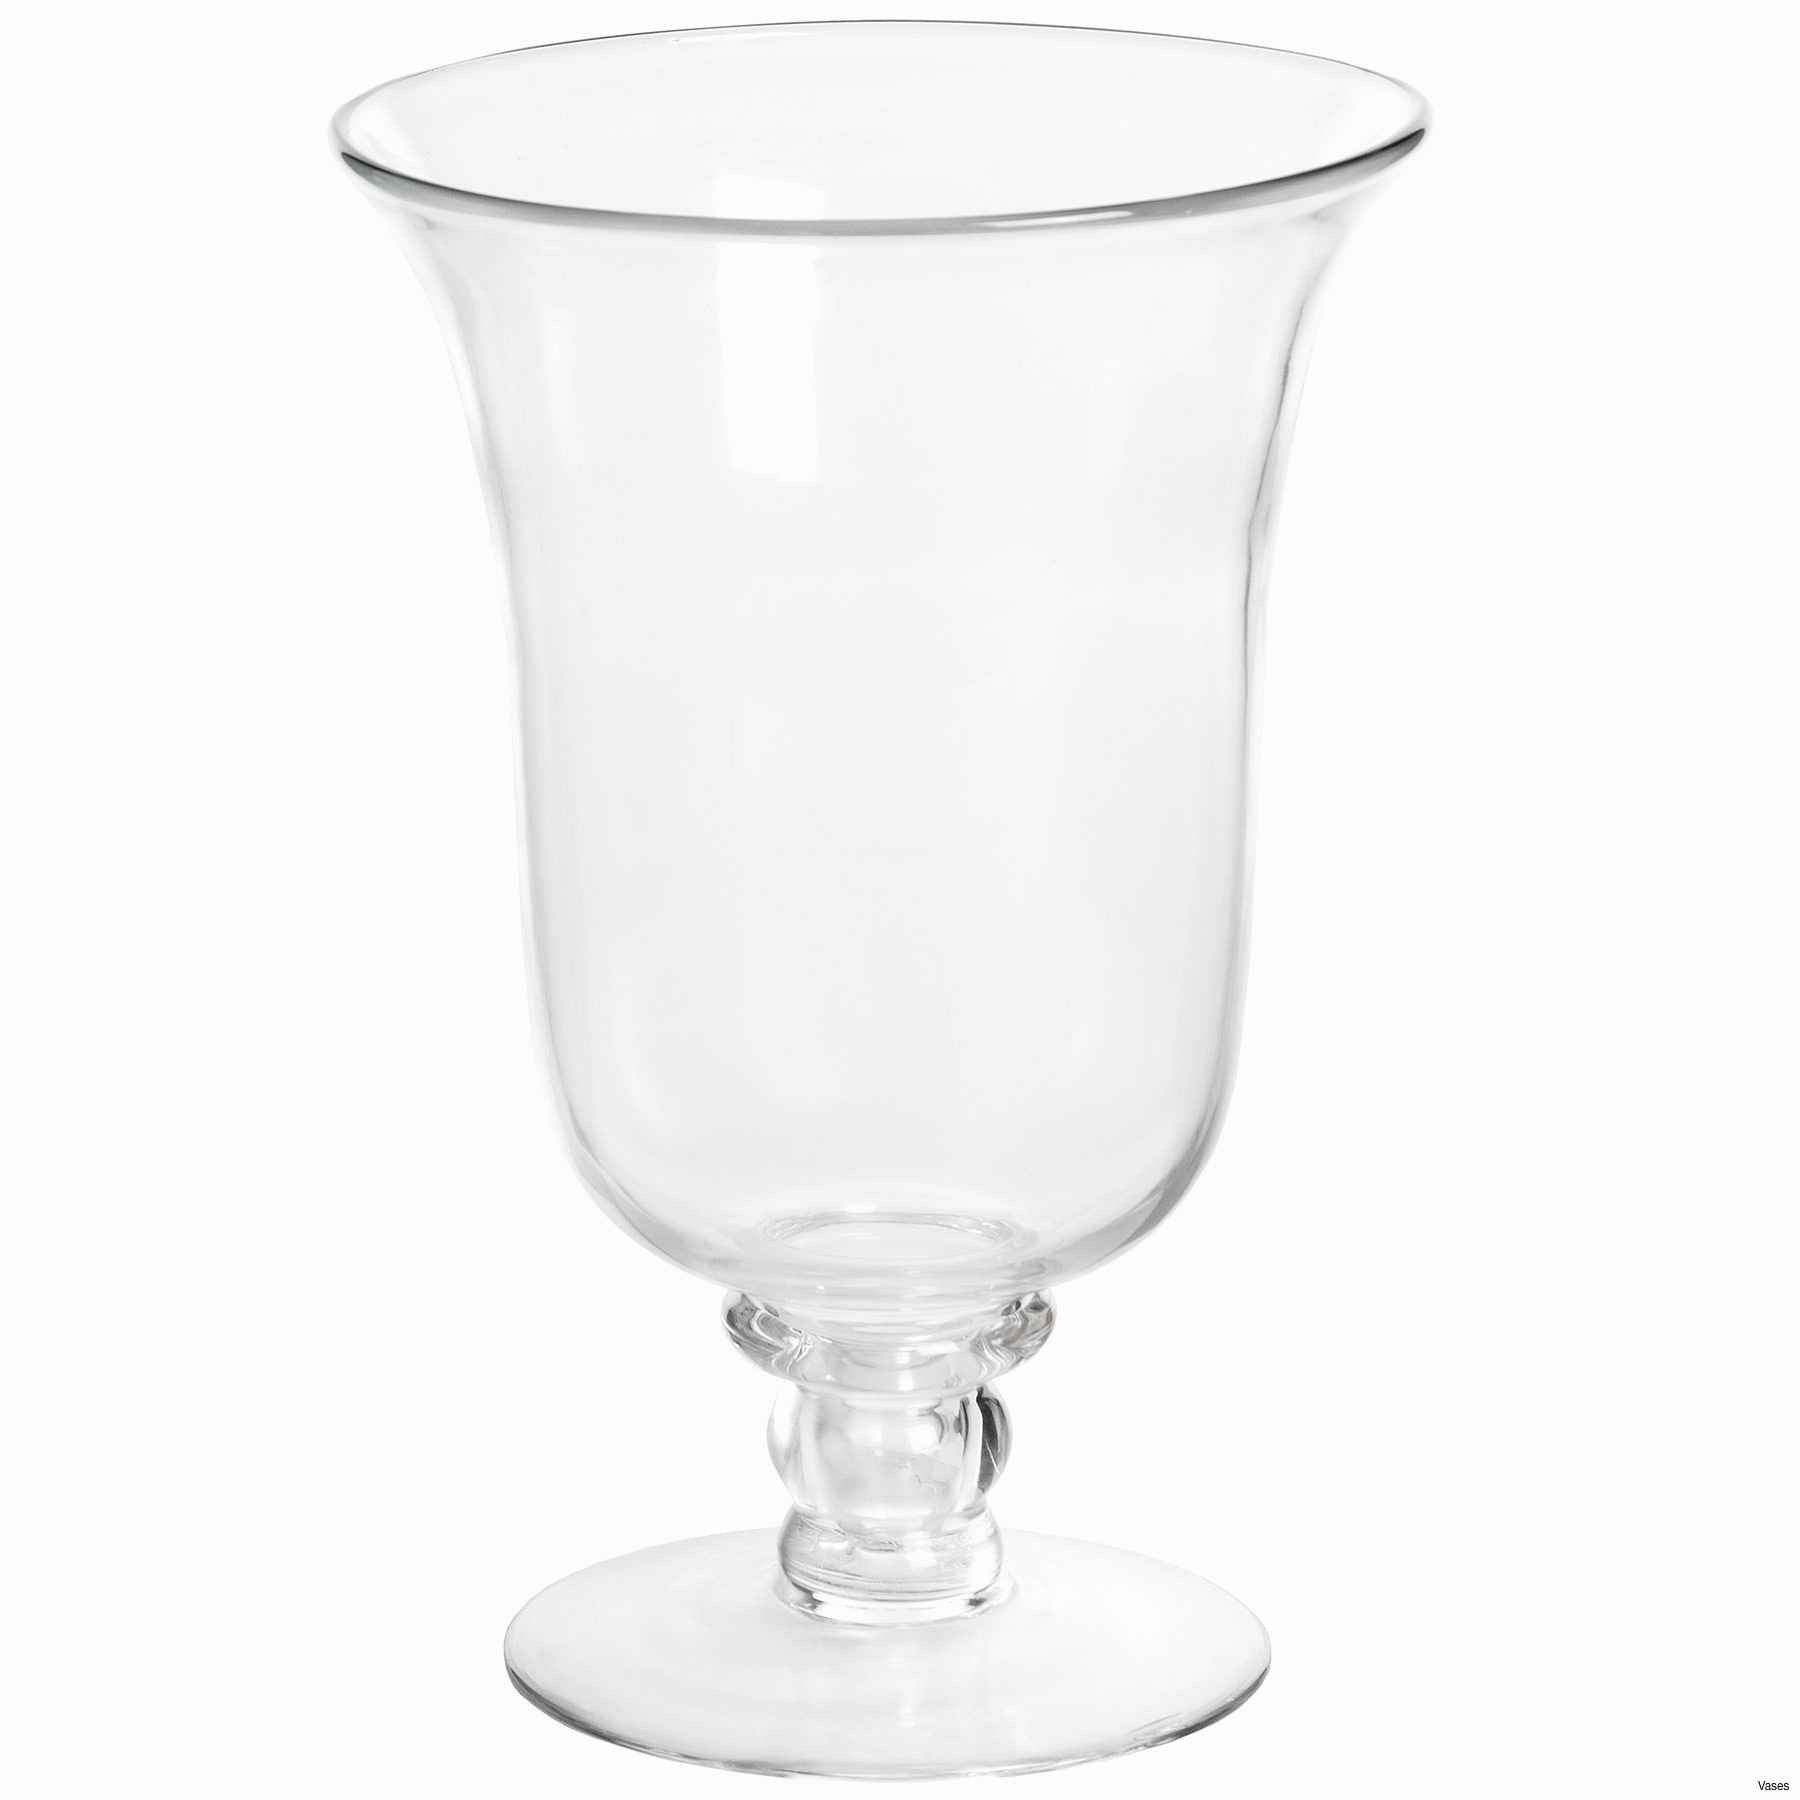 bulk order vases of candle stands wholesale lovely faux crystal candle holders alive with regard to candle stands wholesale lovely faux crystal candle holders alive vases gold tall jpgi 0d cheap in